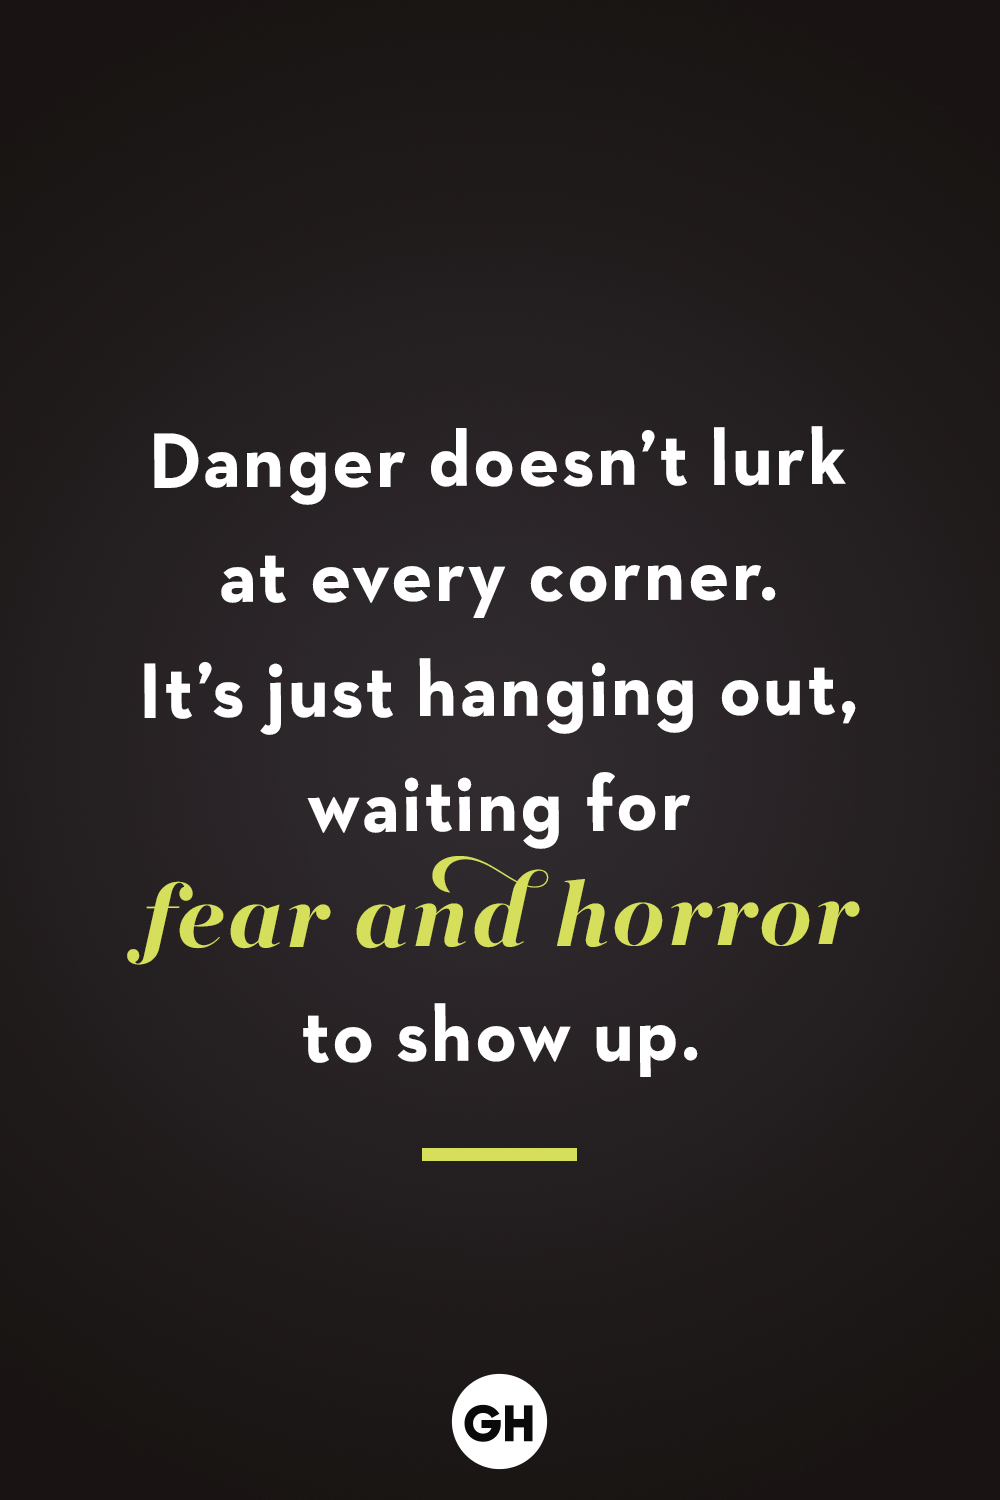 50 Best Scary Quotes Creepy Sayings From Movies Books - smith cult family roblox